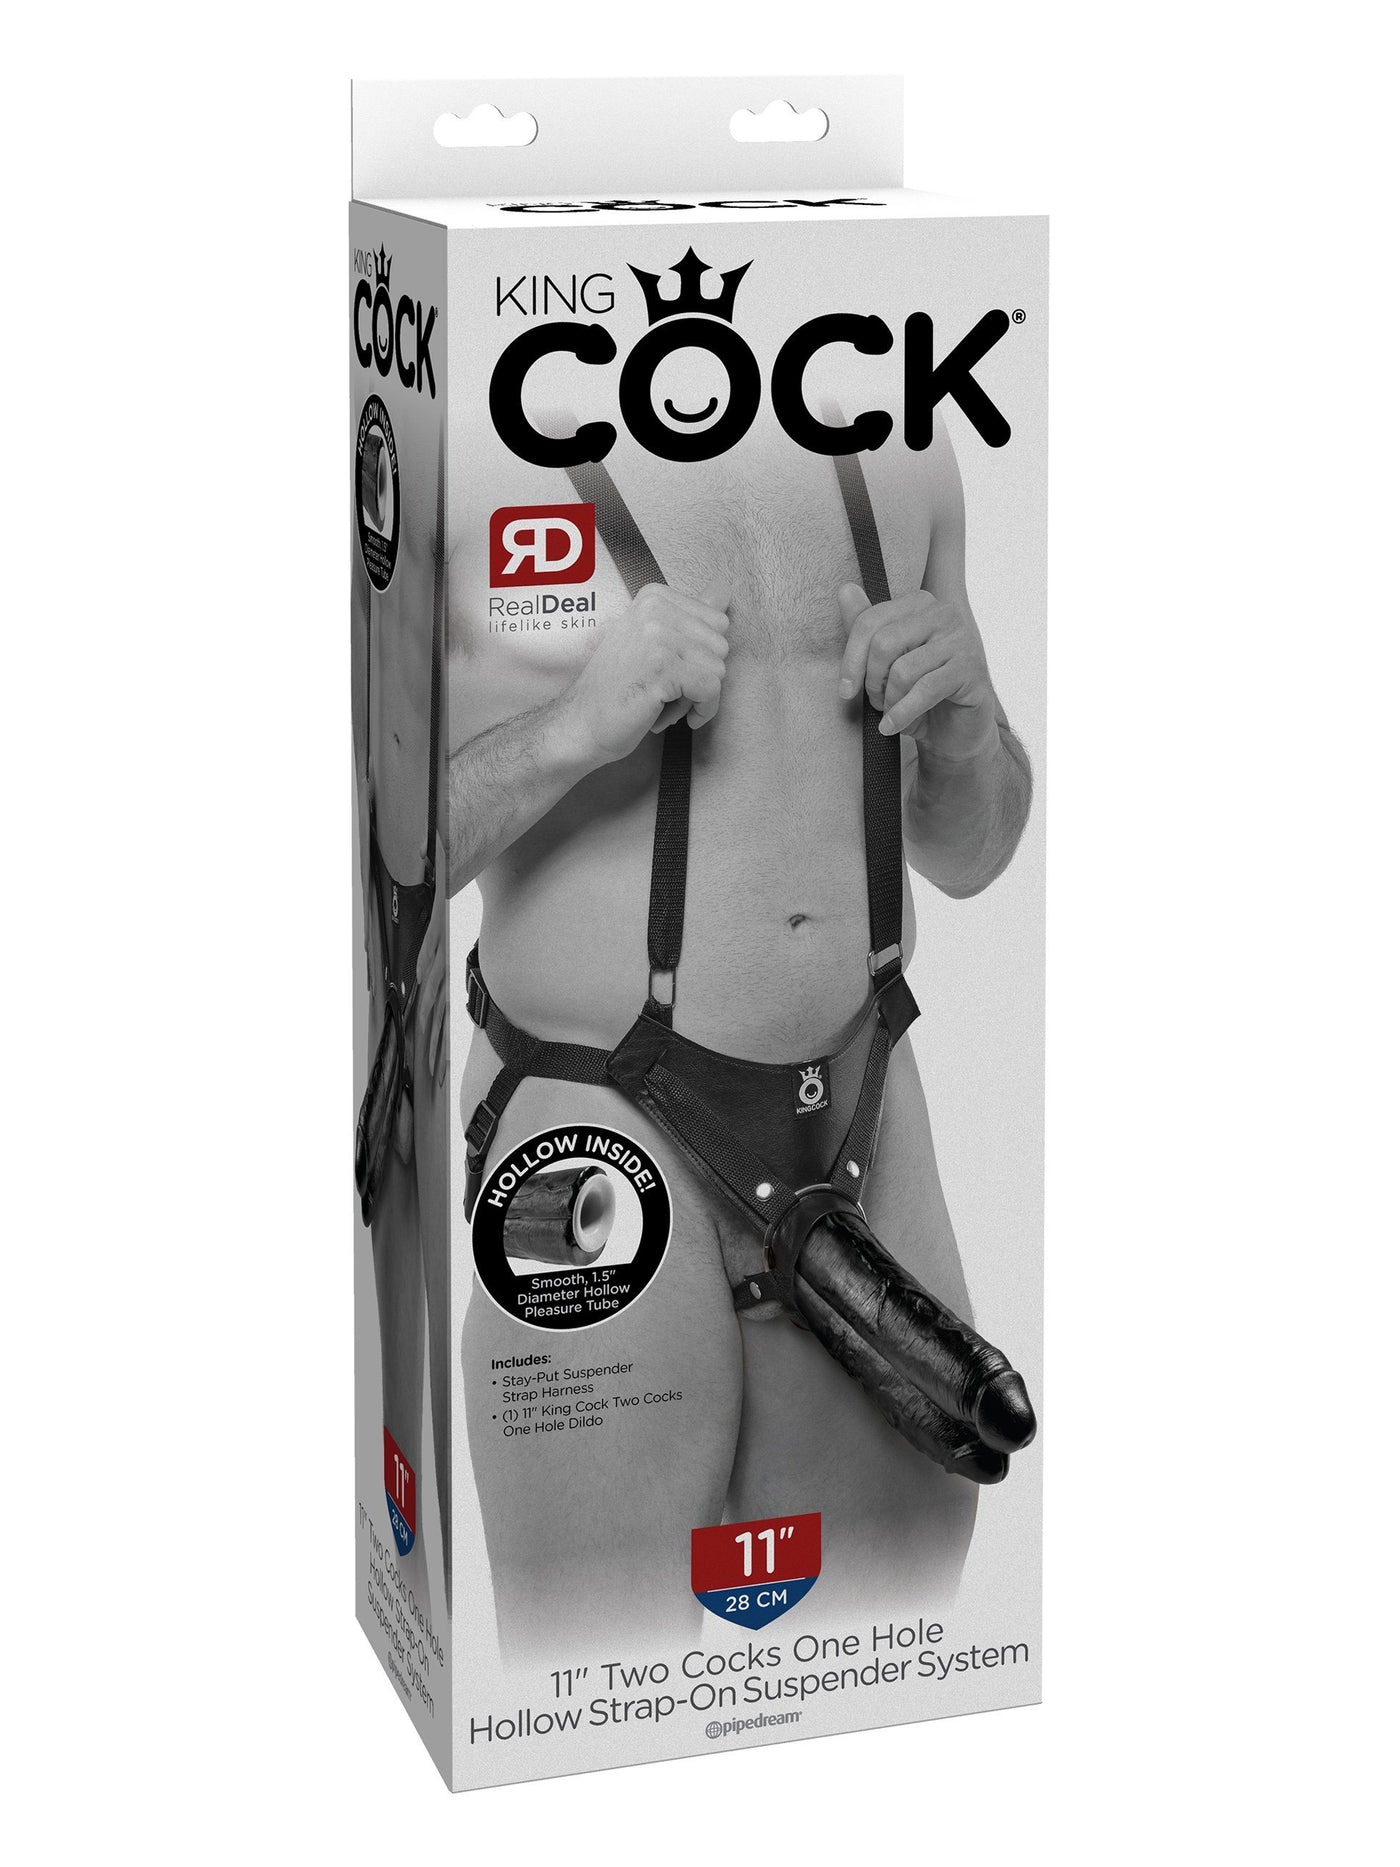 King Cock Two Cocks One Hole Hollow Harness More Toys Pipedream Products 